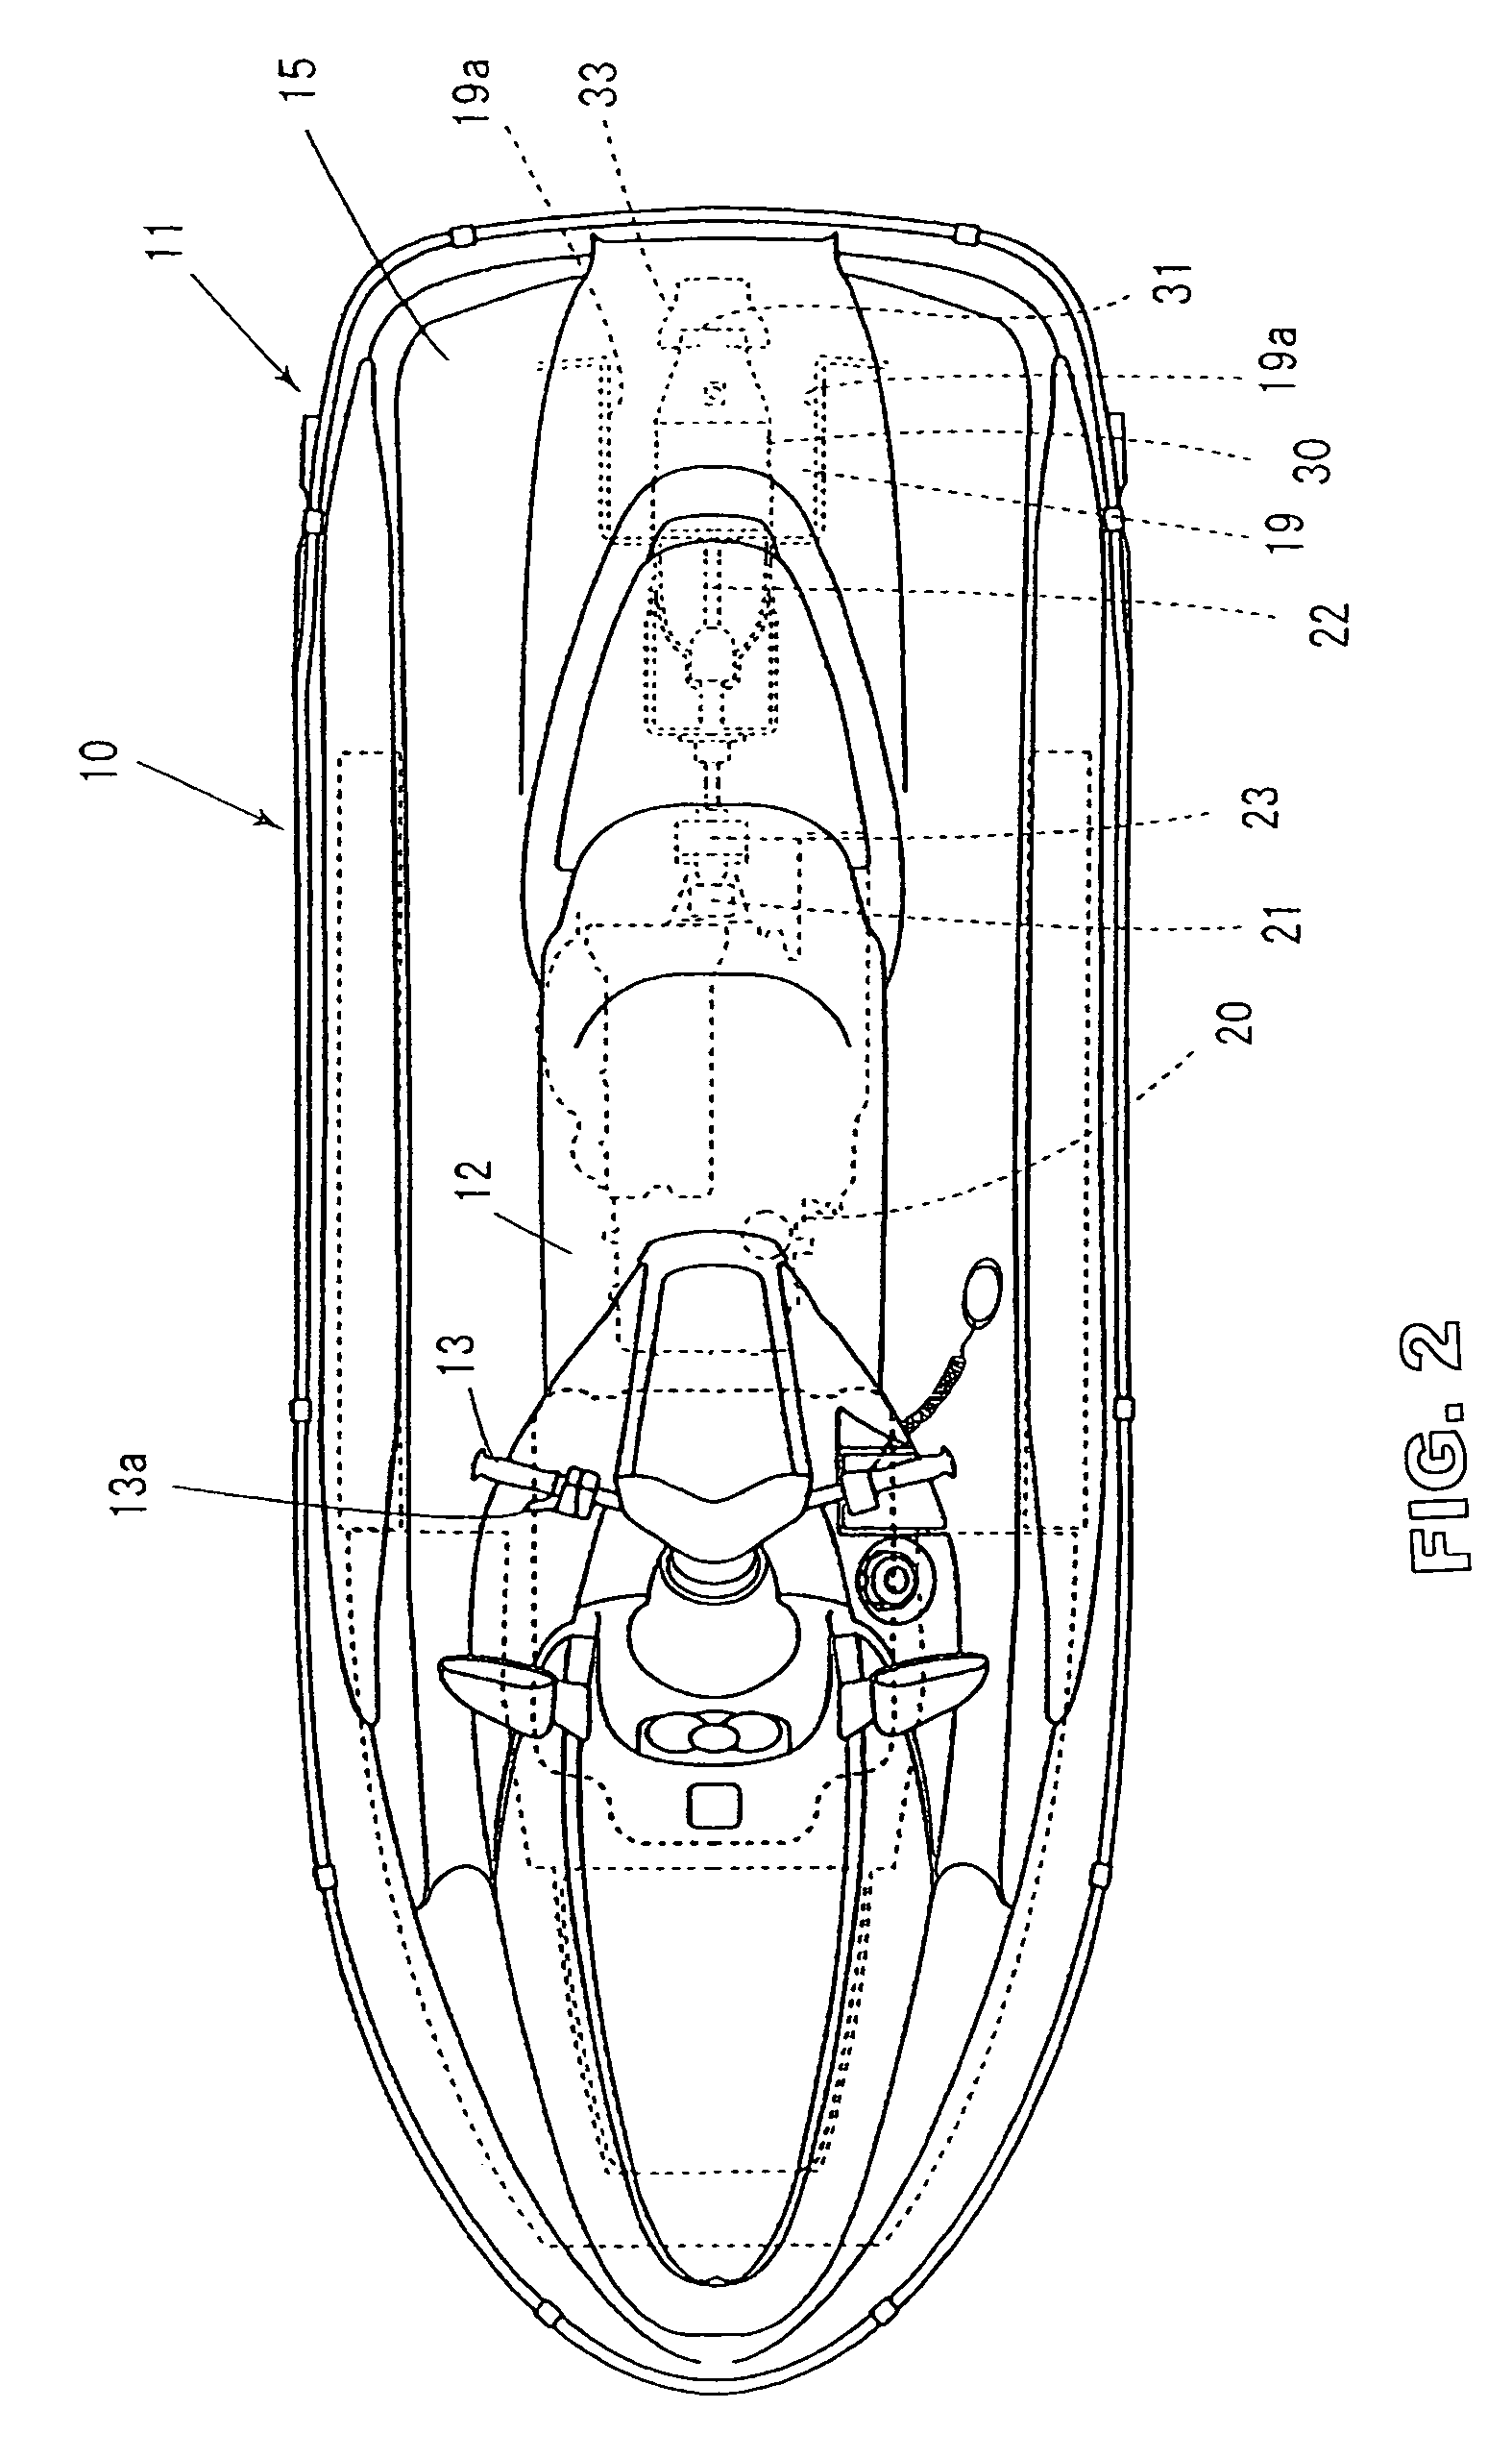 Water jet propulsion boat having improved ride plate